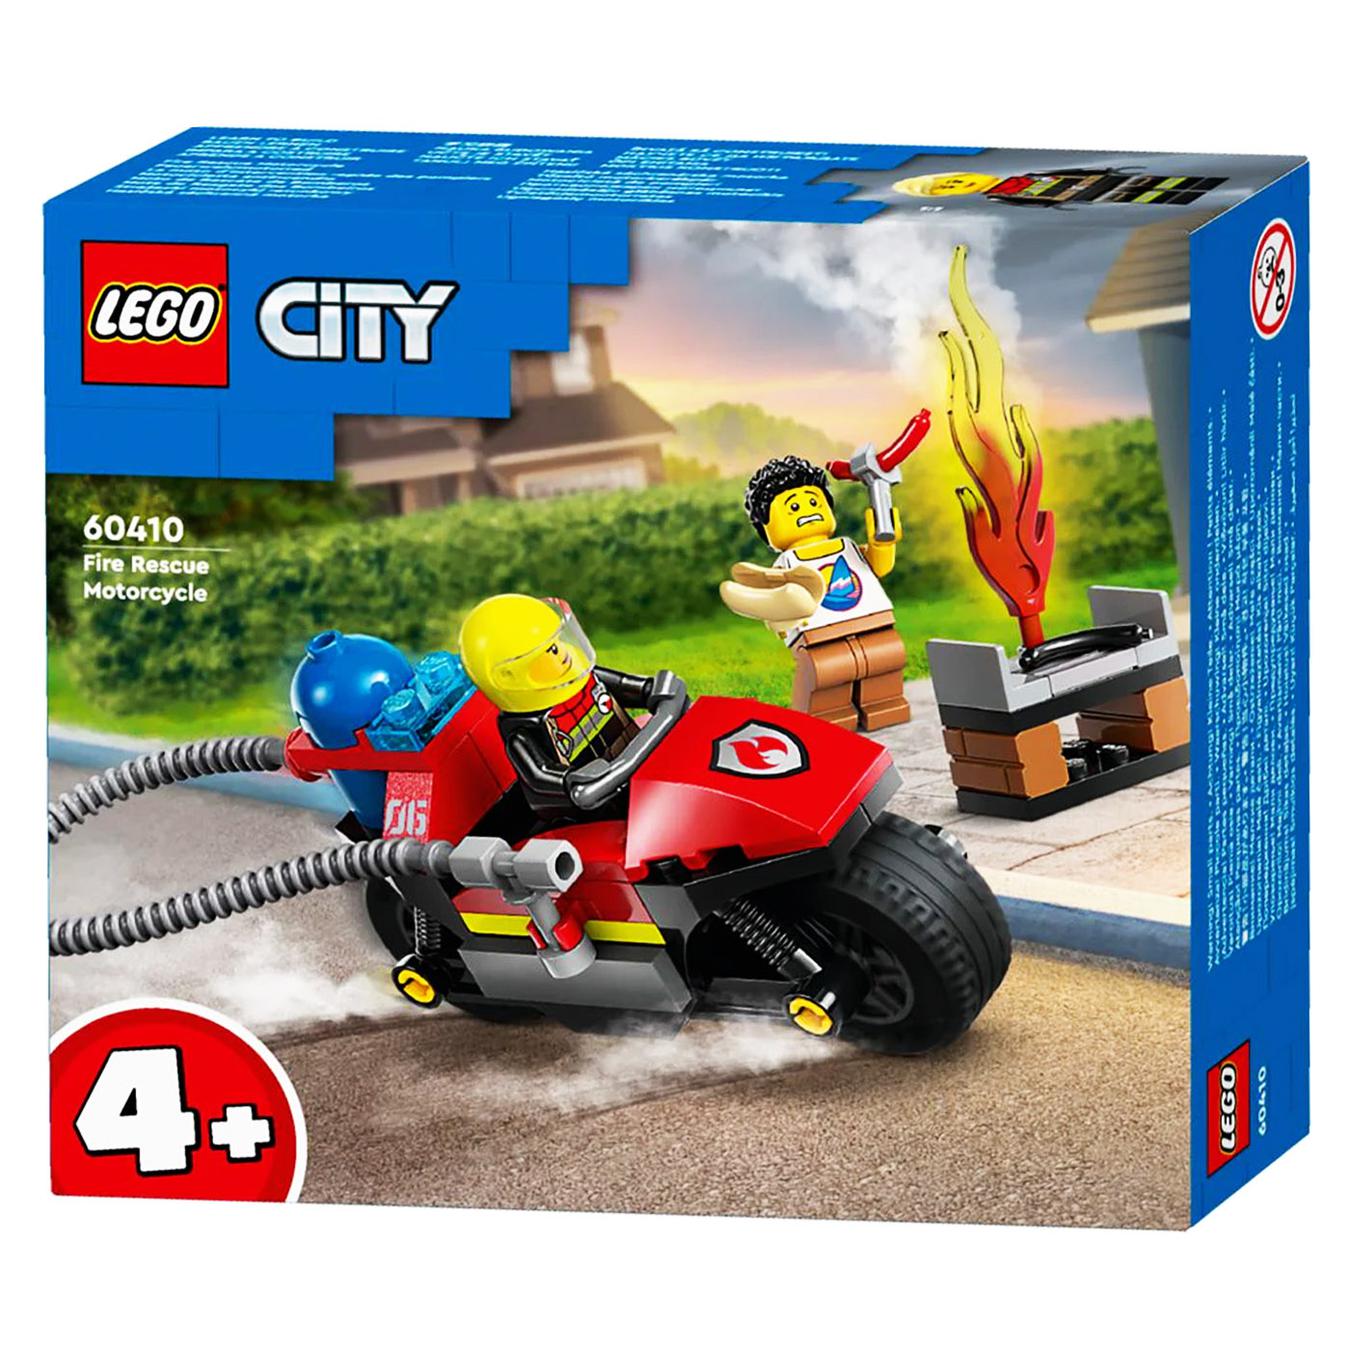 Constructor LEGO City 60410 Fire Rescue Motorcycle